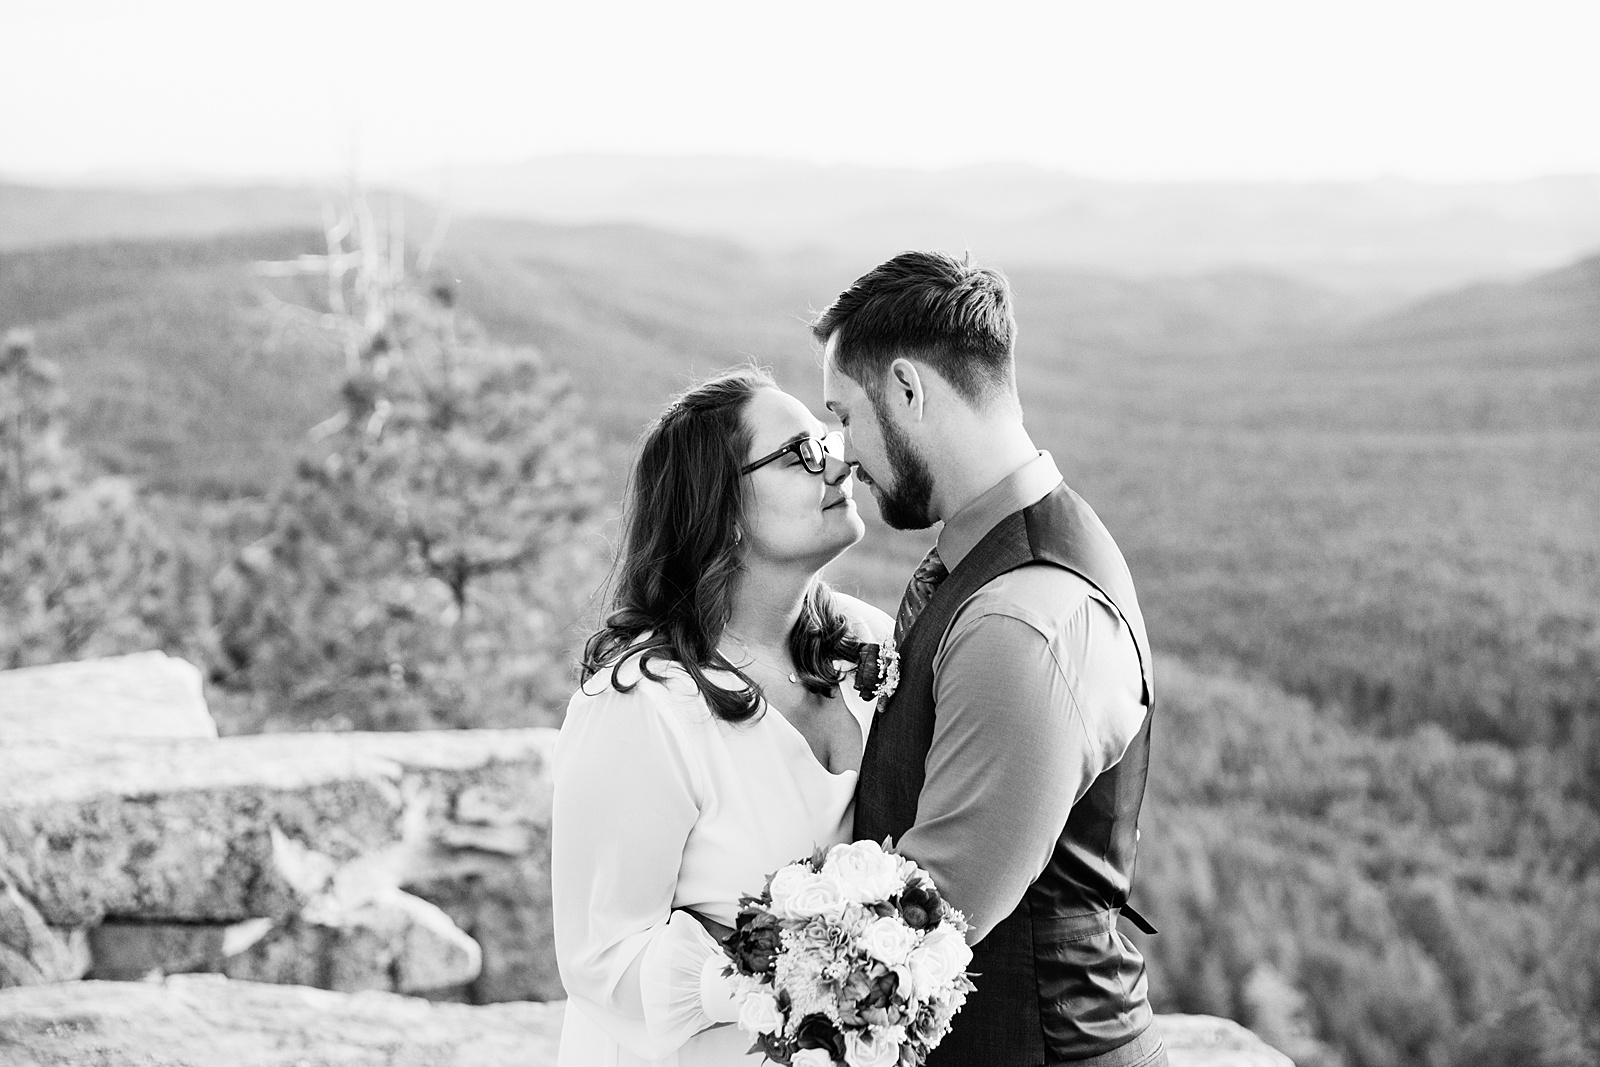 Bride and Groom share an intimate moment at their Mogollon Rim elopement by Arizona elopement photographer PMA Photography.